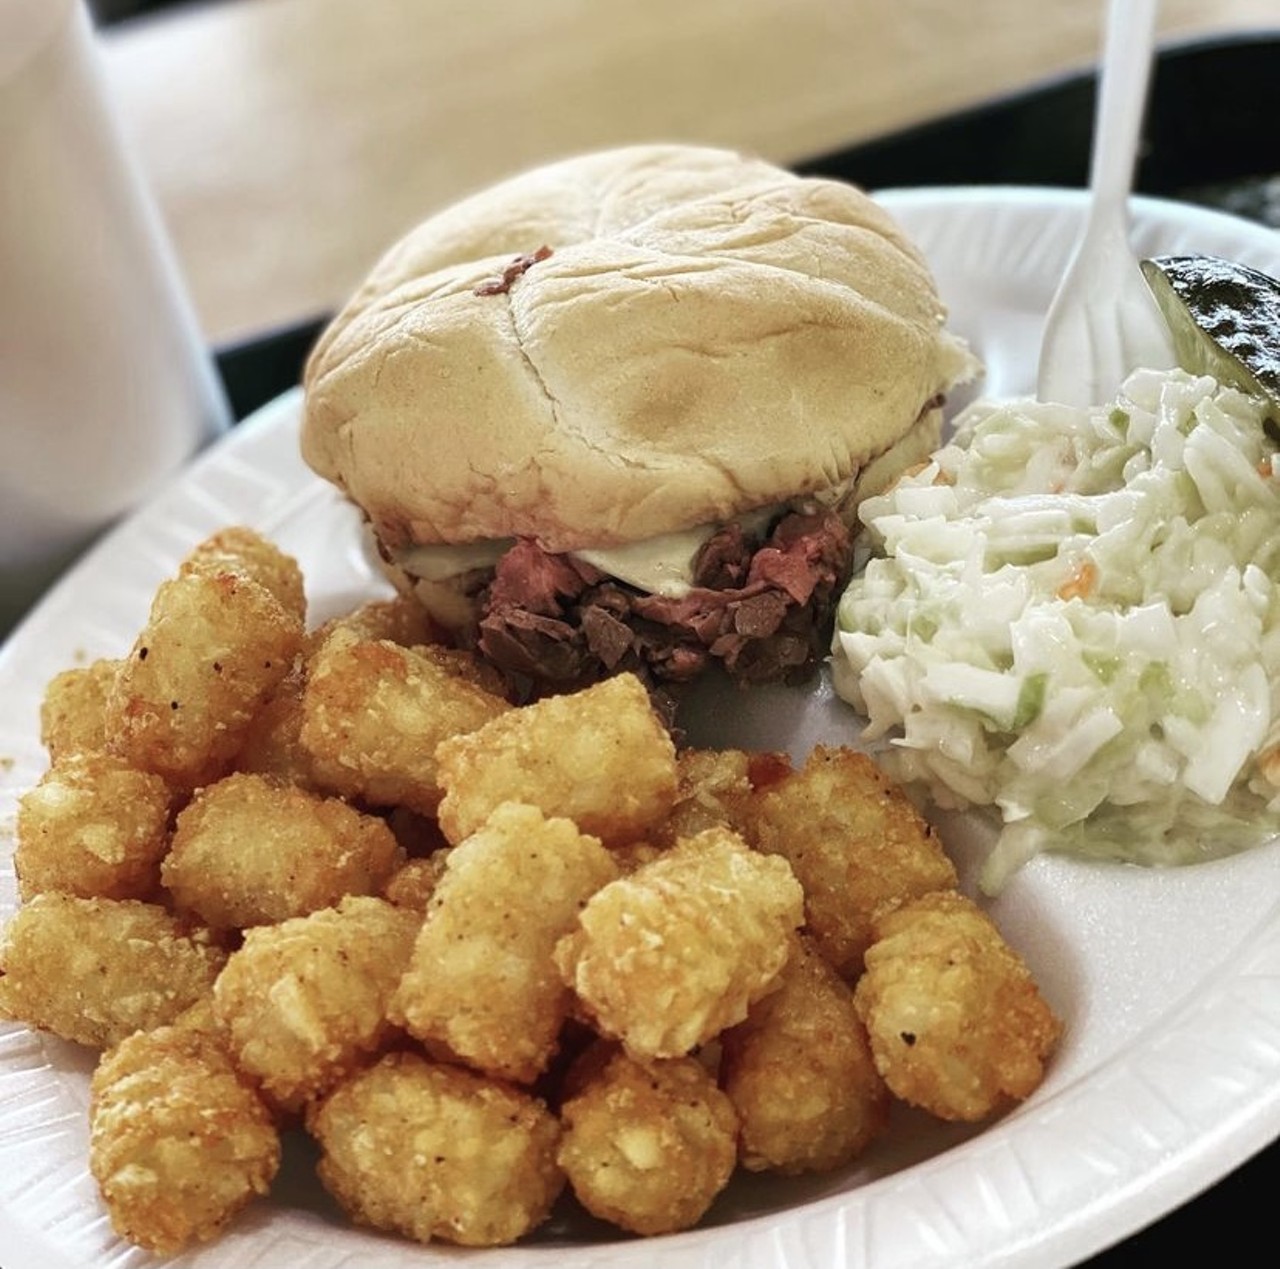 Beefy King 
424 North Bumby Avenue
Orlando, FL 32803, (407) 894-2241
Beefy King has been serving beef sandwiches for over 40 years. If you are looking for a delicious and simple bite you can get their 2 meat combo sandwiches for only $8.50.
Photo via Beefy King/Instagram